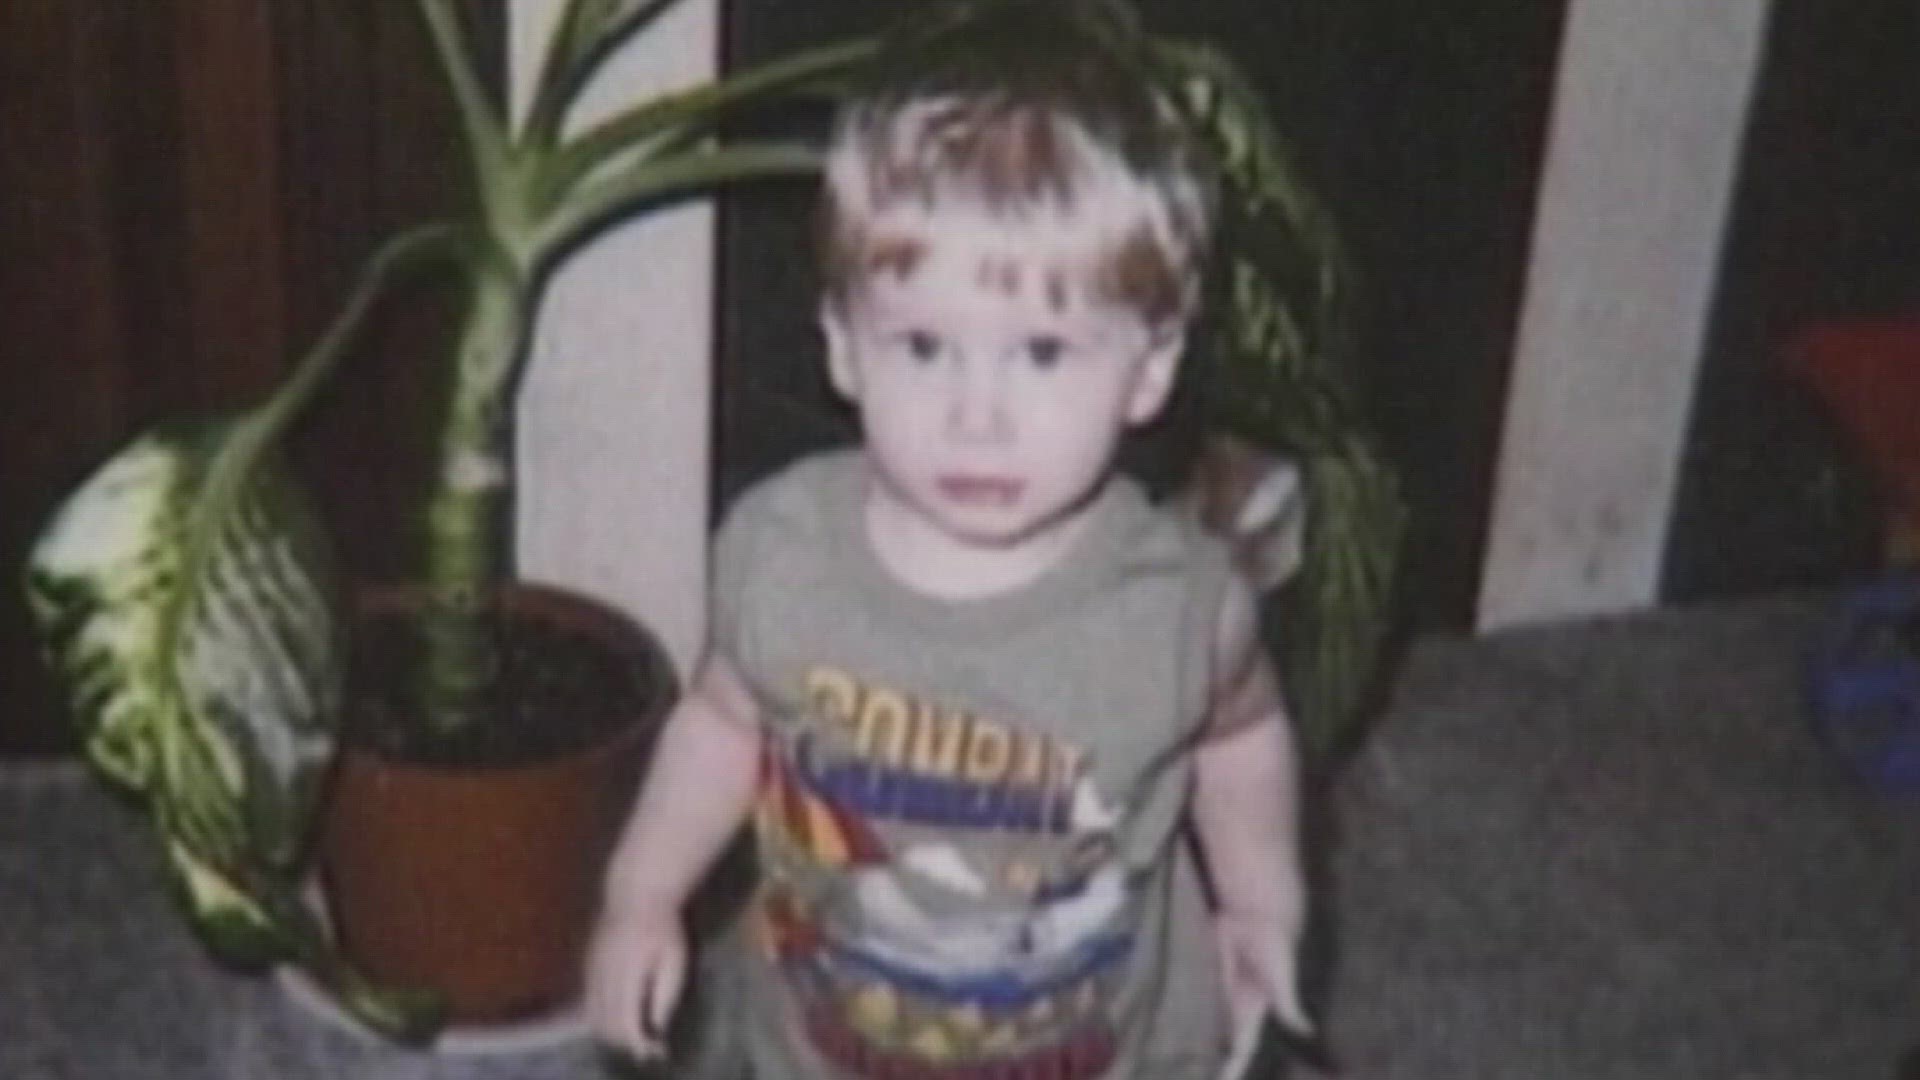 Cody was reported missing on March 11, 1997. He was living at his grandmother’s house, in the custody of Robin’s sister, when he disappeared.